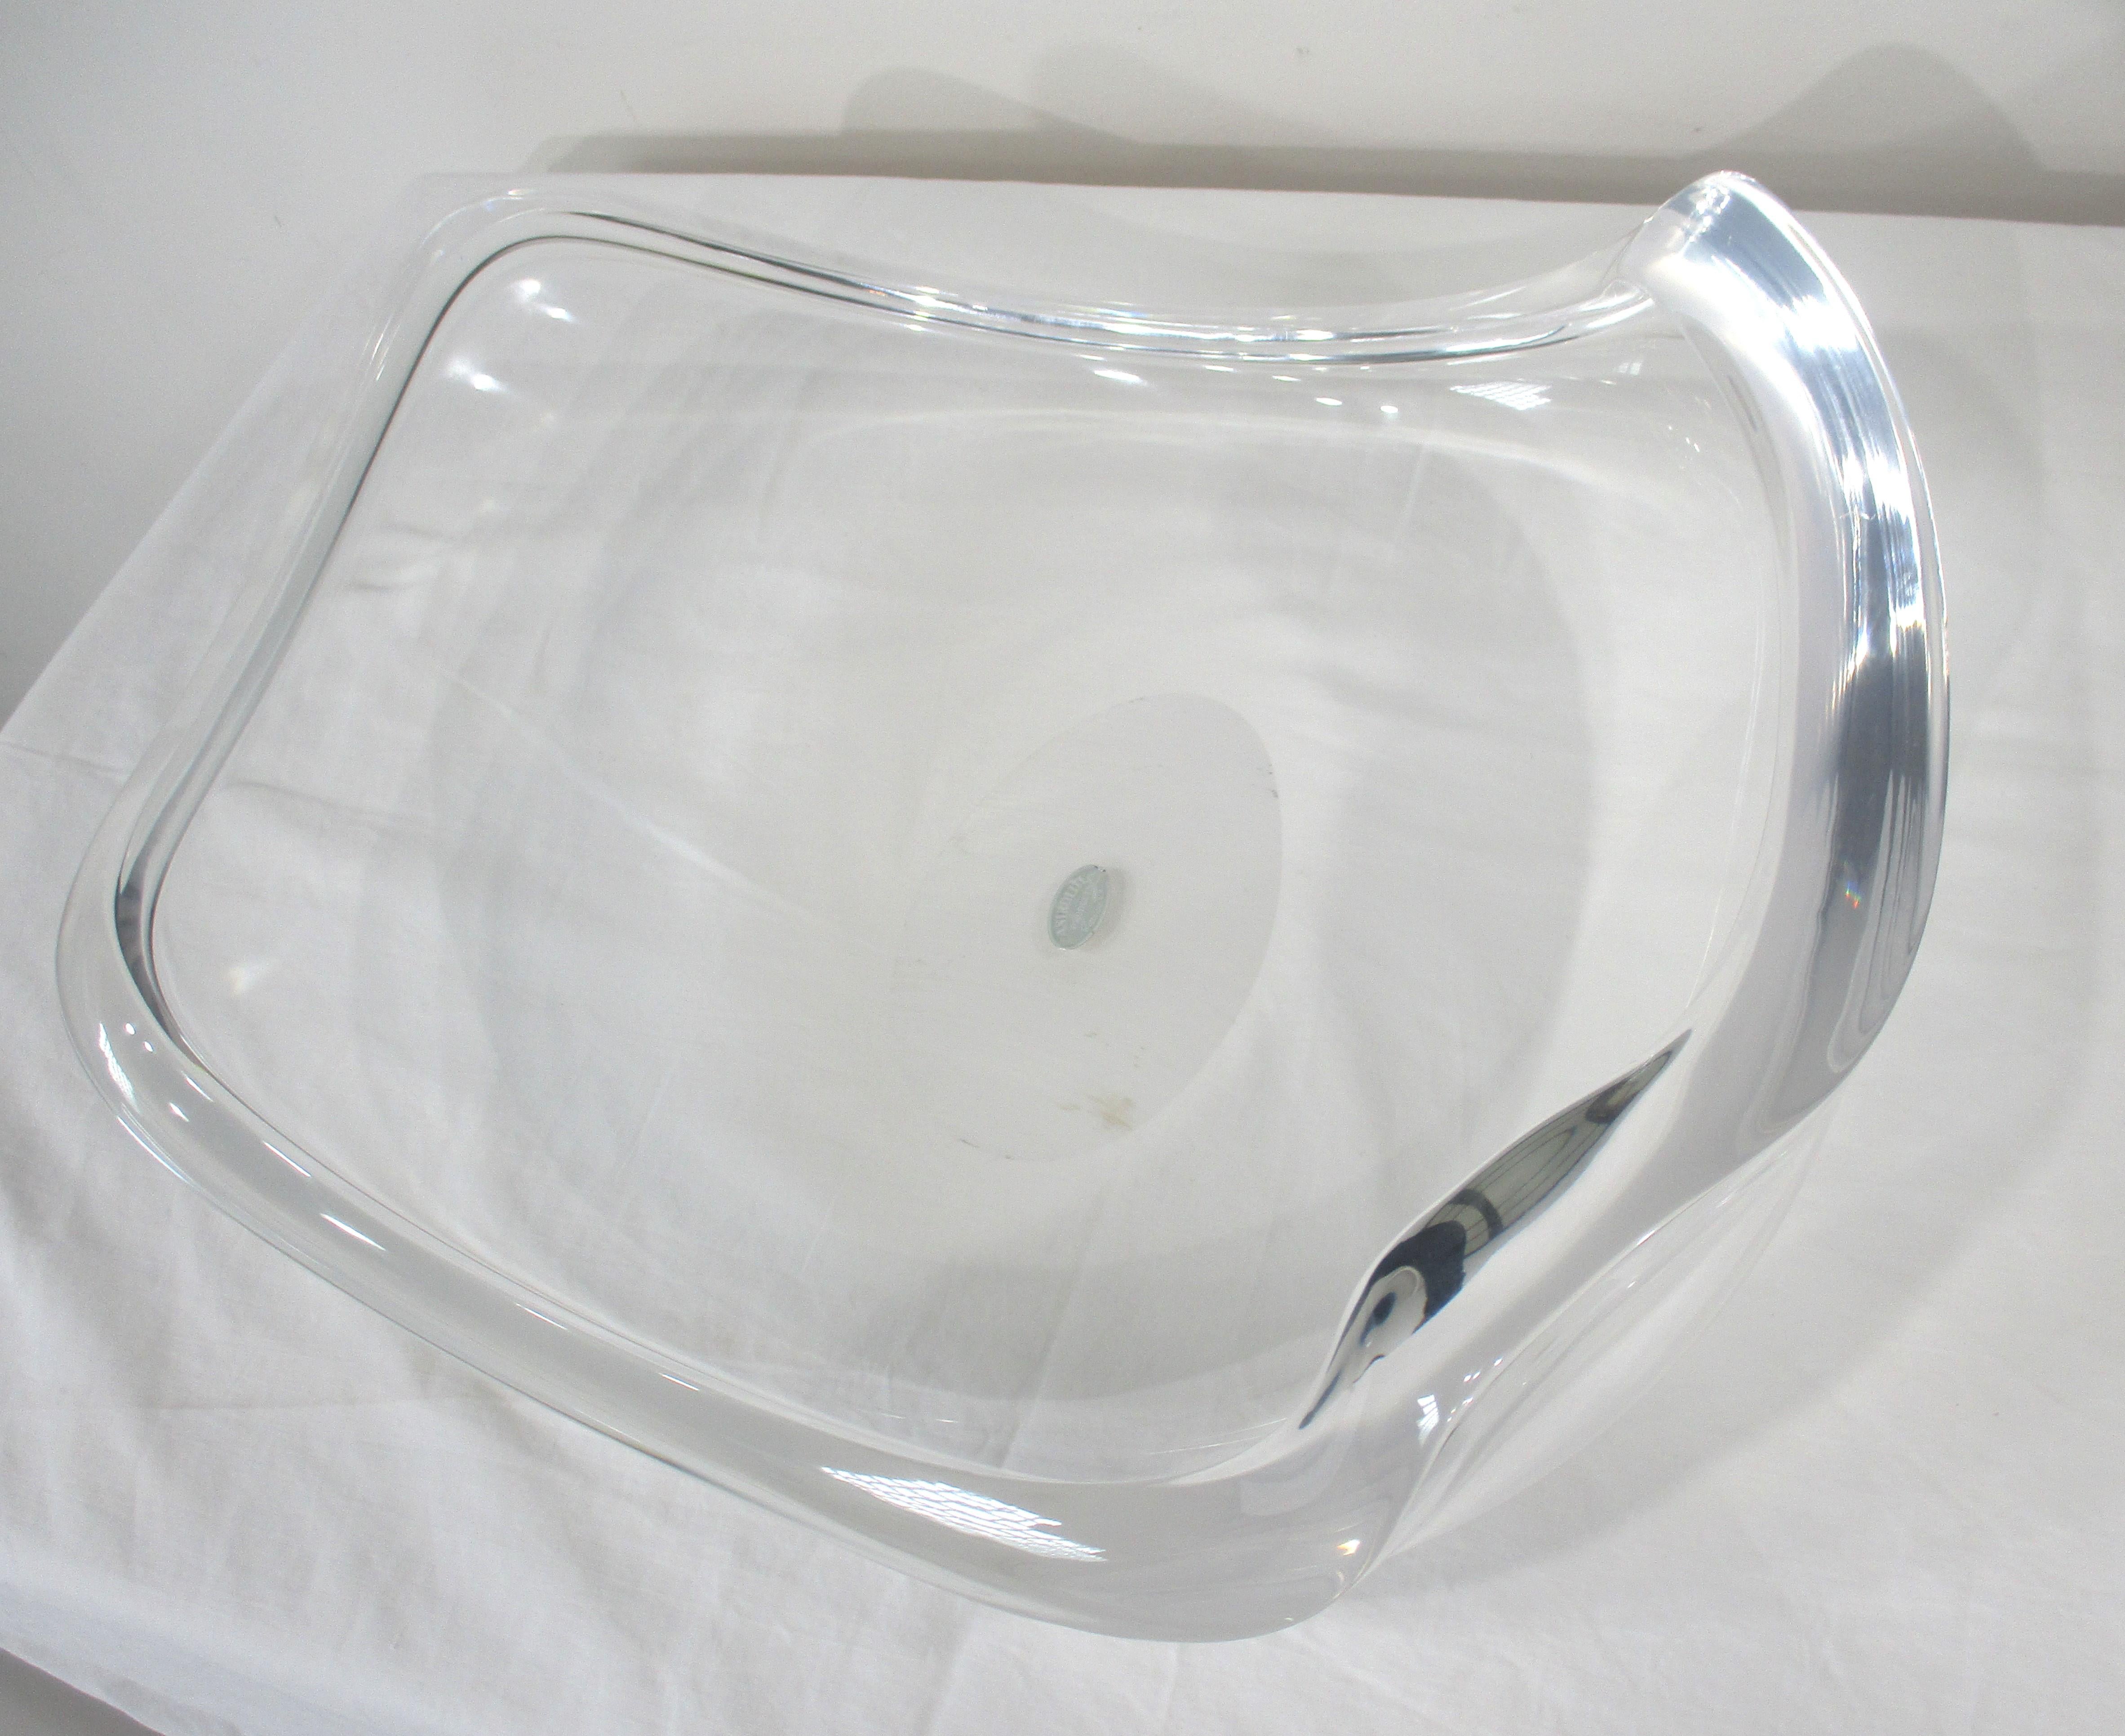 Herb Ritts Large Mid Century Sculptural Lucite Center Piece Bowl for Astrolite In Good Condition For Sale In Cincinnati, OH